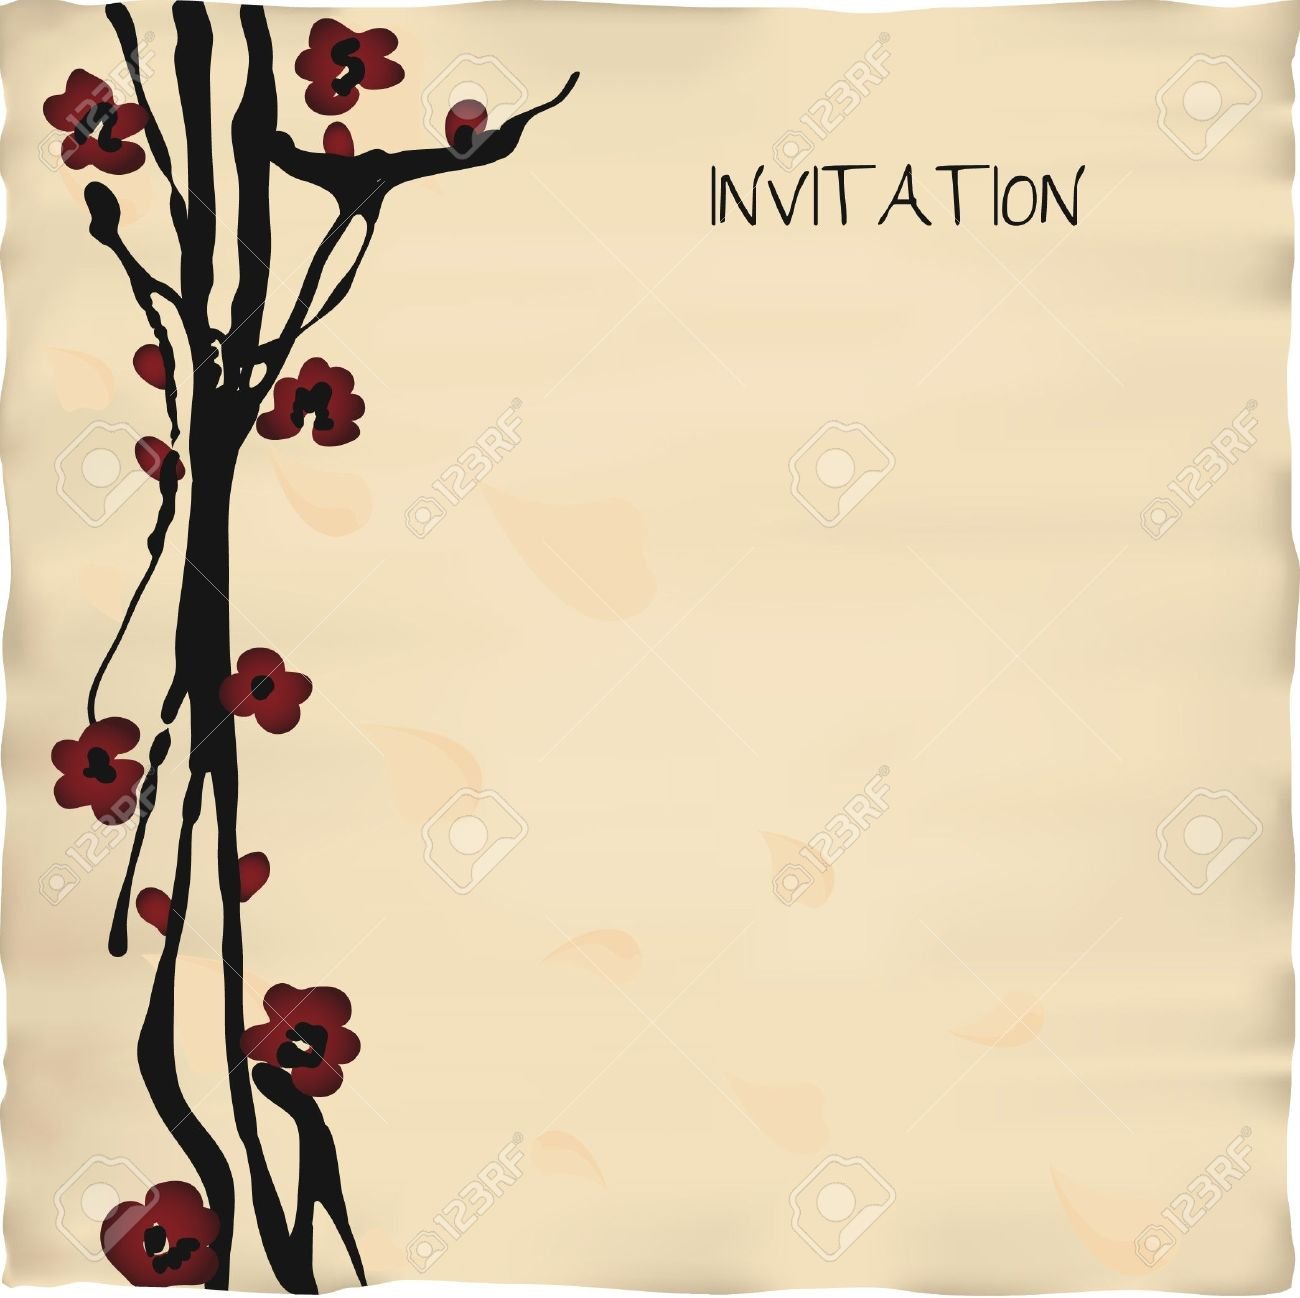 Japanese Or Chinese Style Invitation Card Template Royalty Free